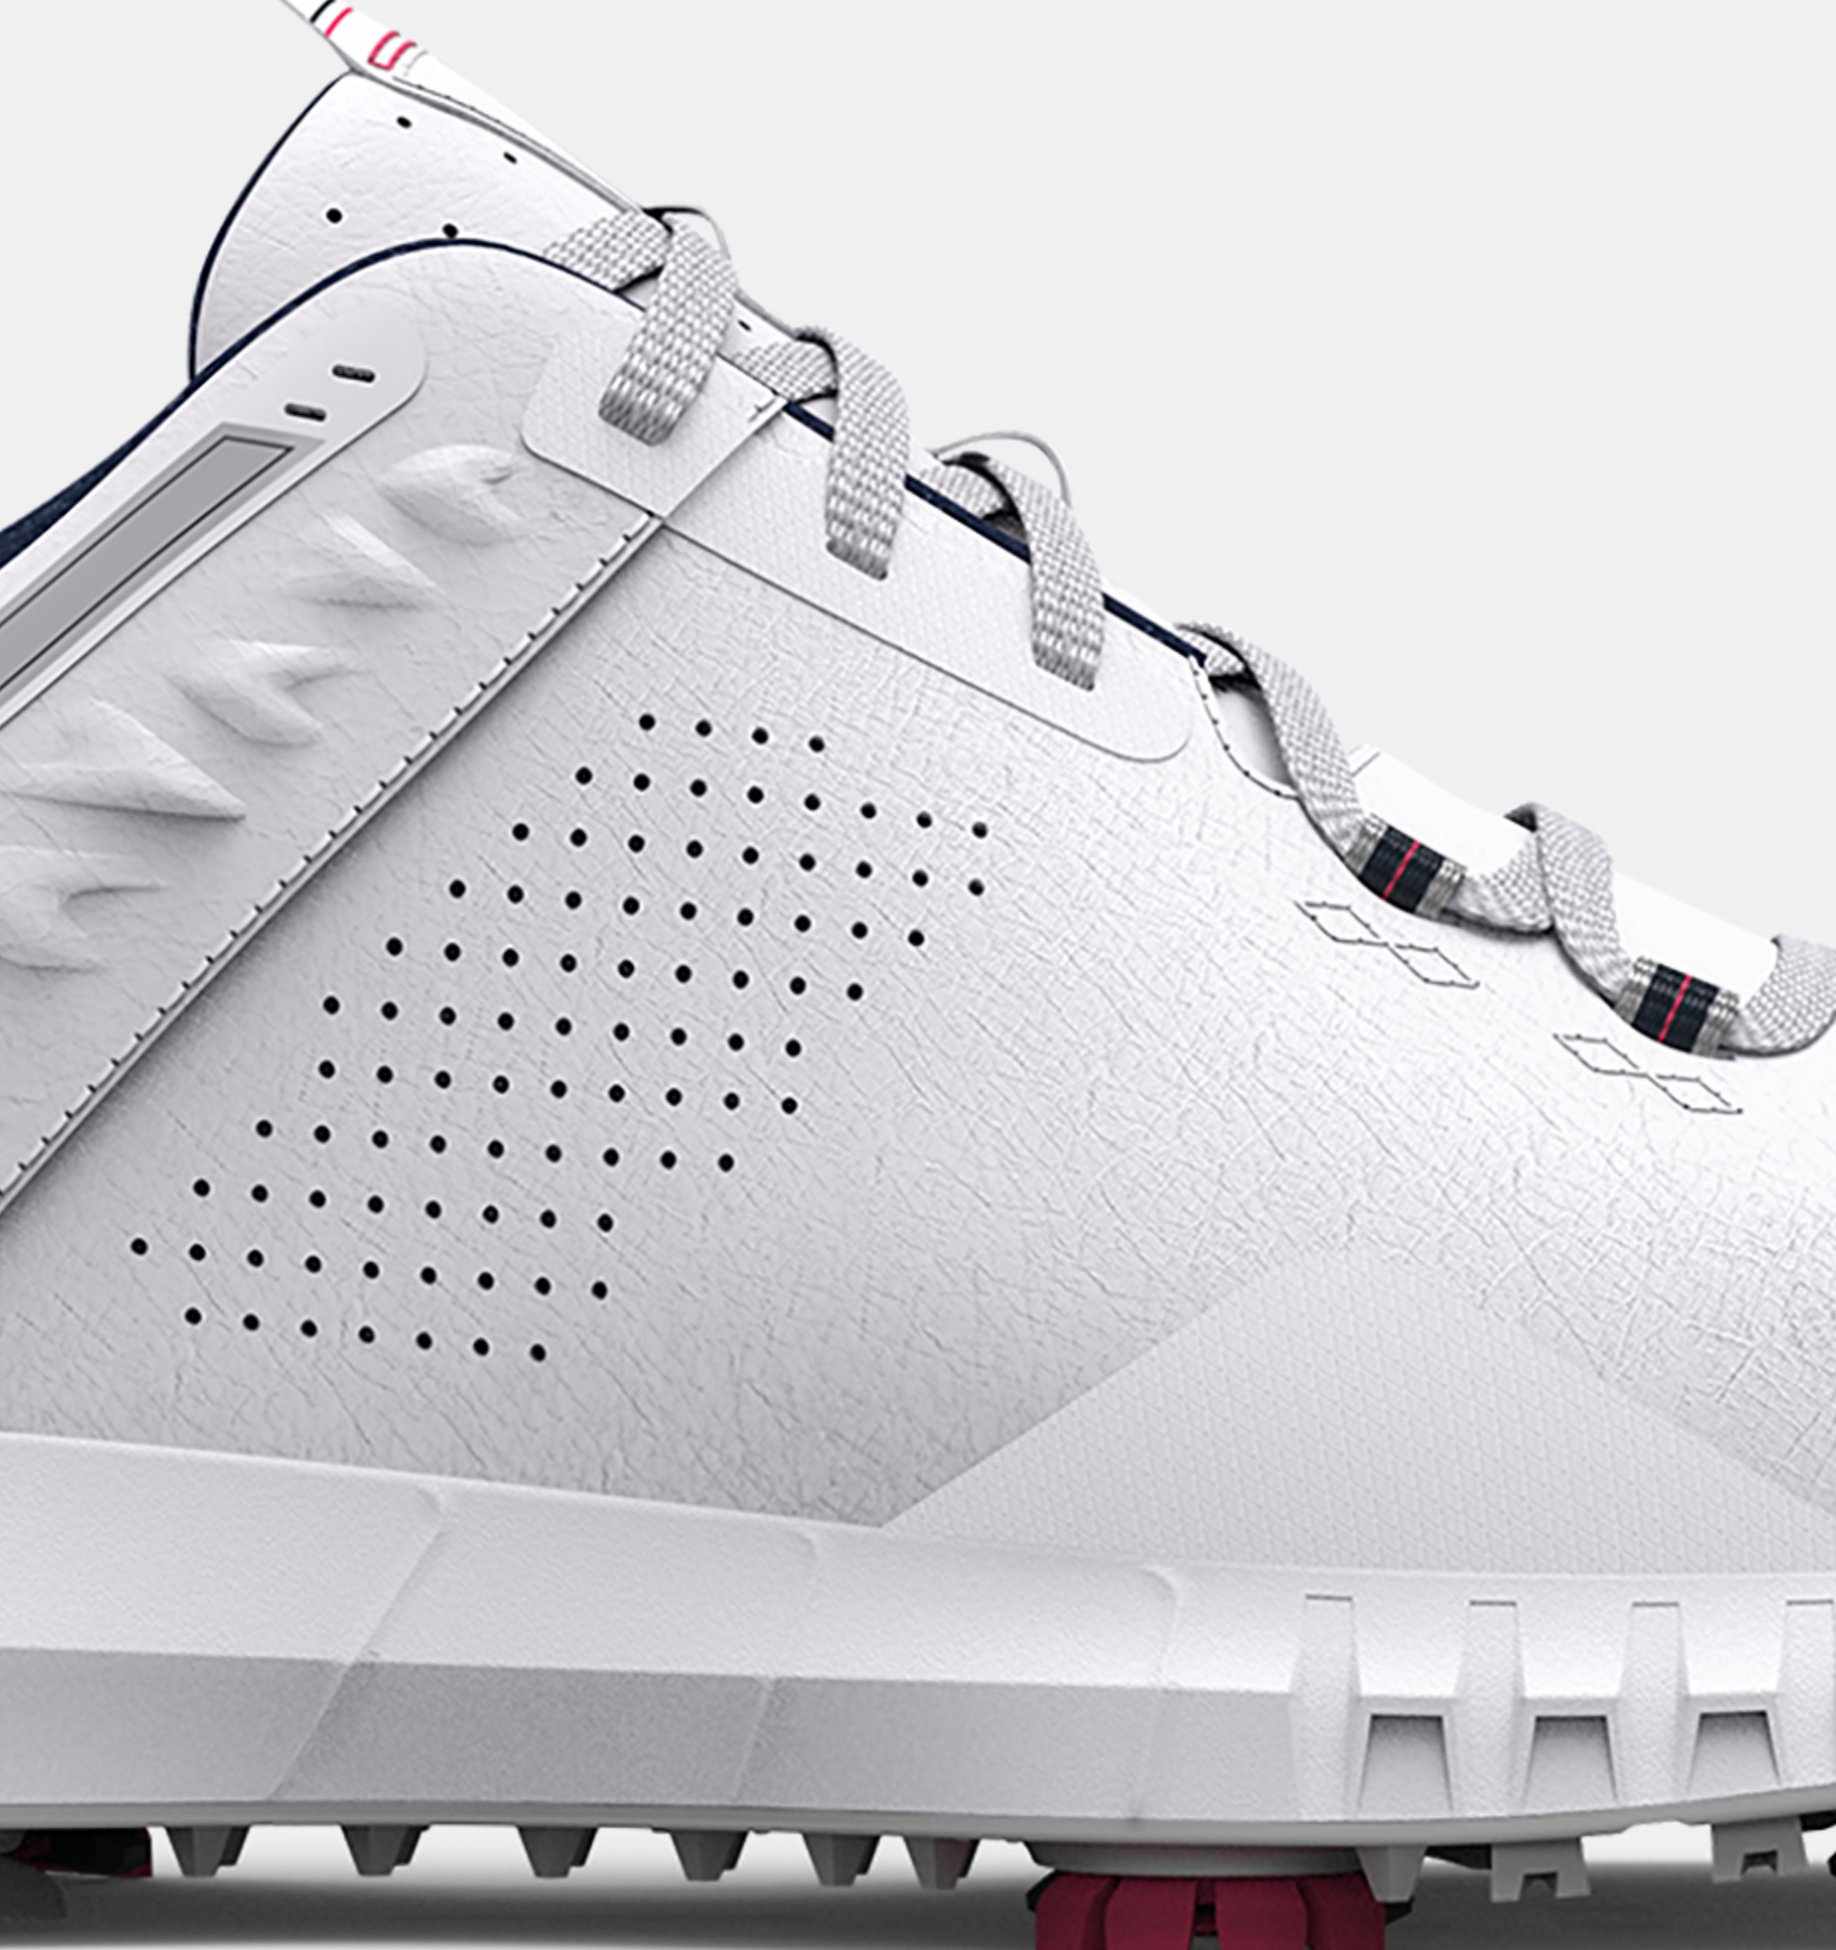 When Will the Under Armour Golf Shoes Be Released?